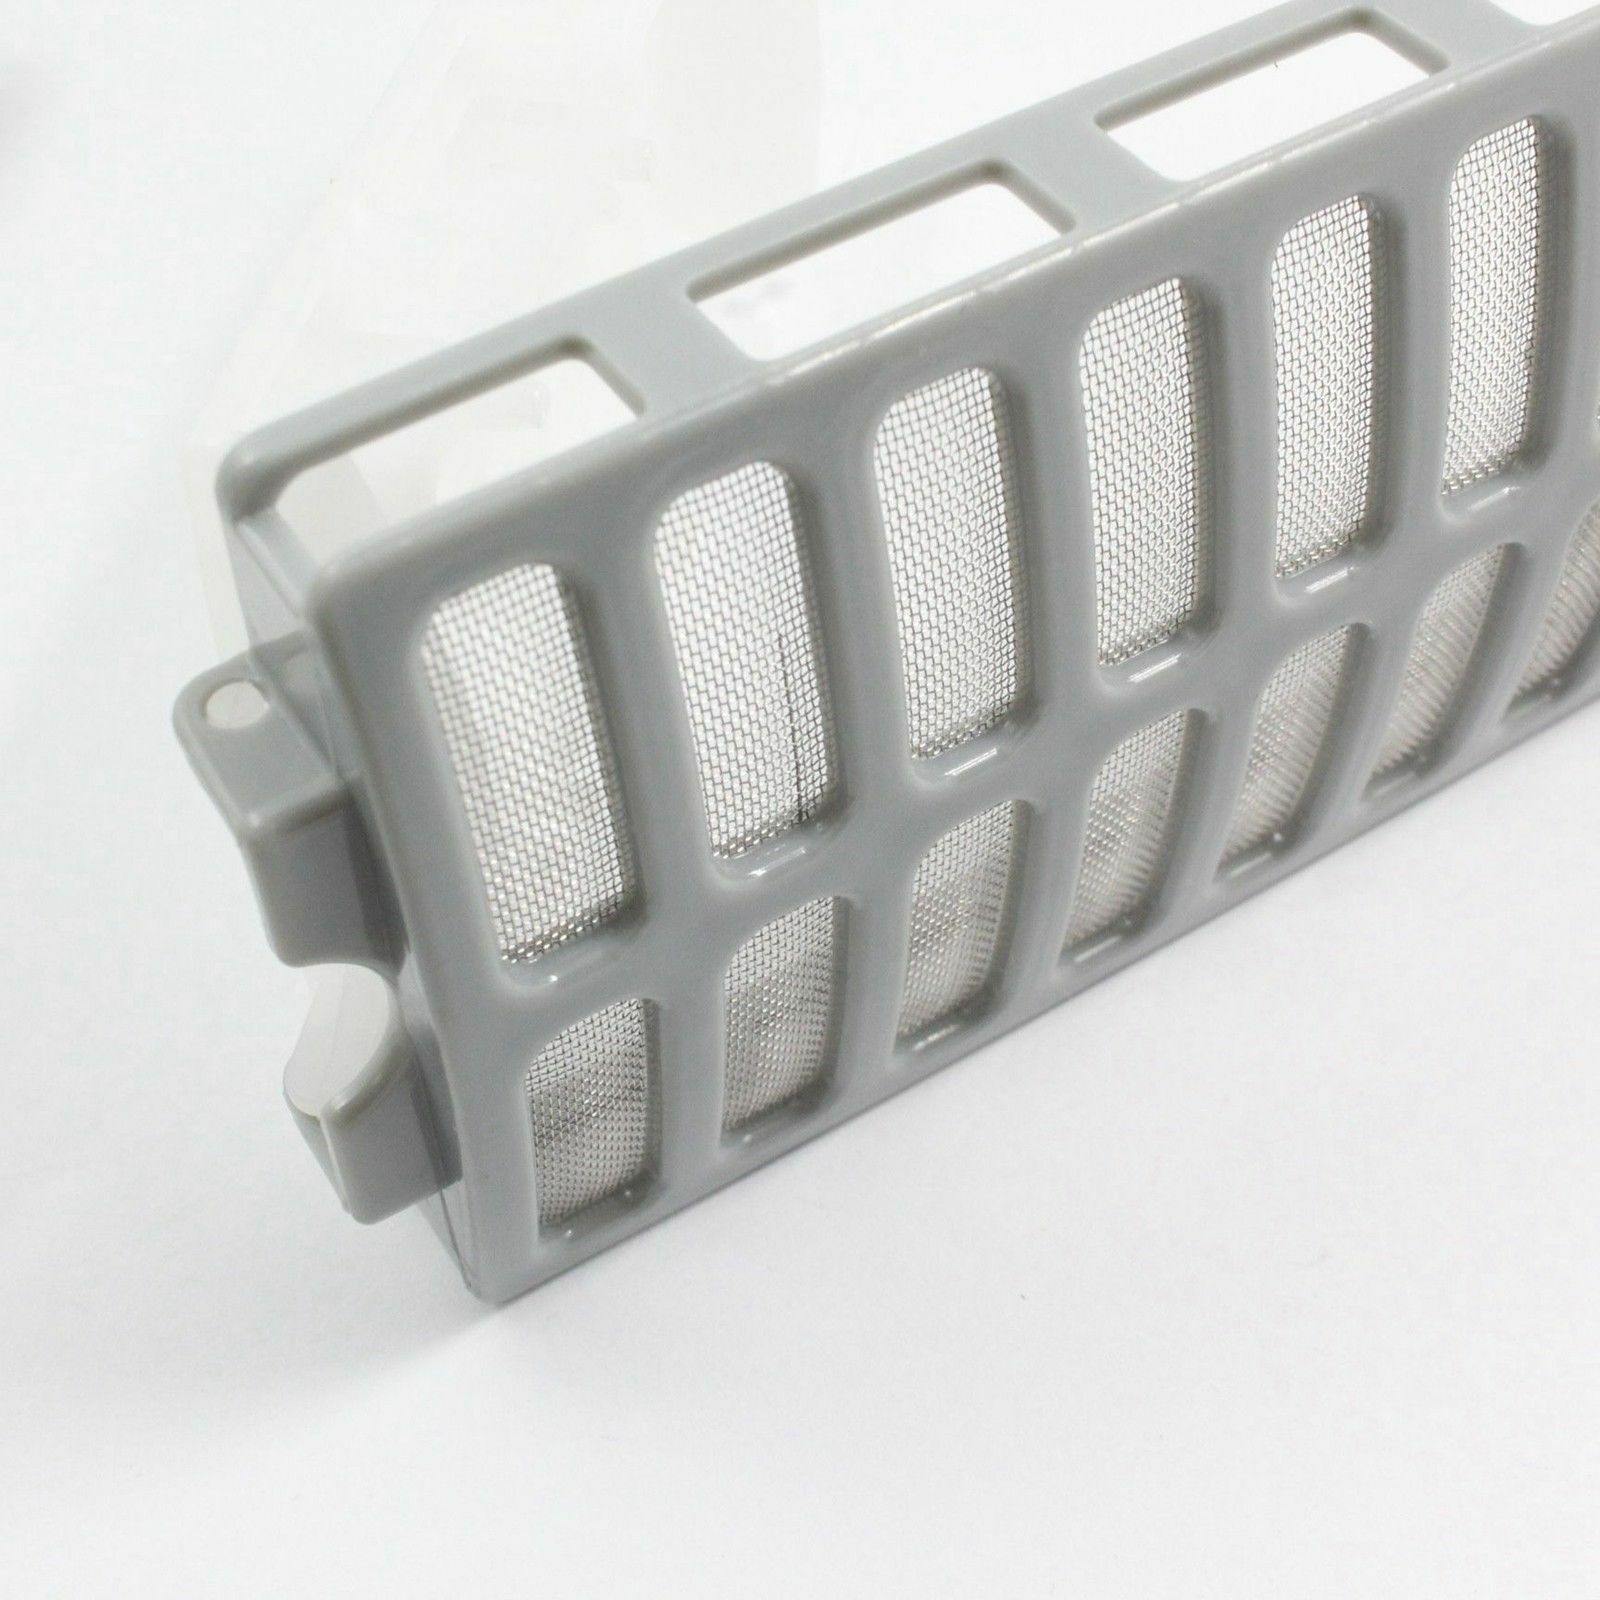 Washing Machine Lint Filter Assembly Mesh For LG WT-H9556 WT-R107 WT-R807 Sparesbarn